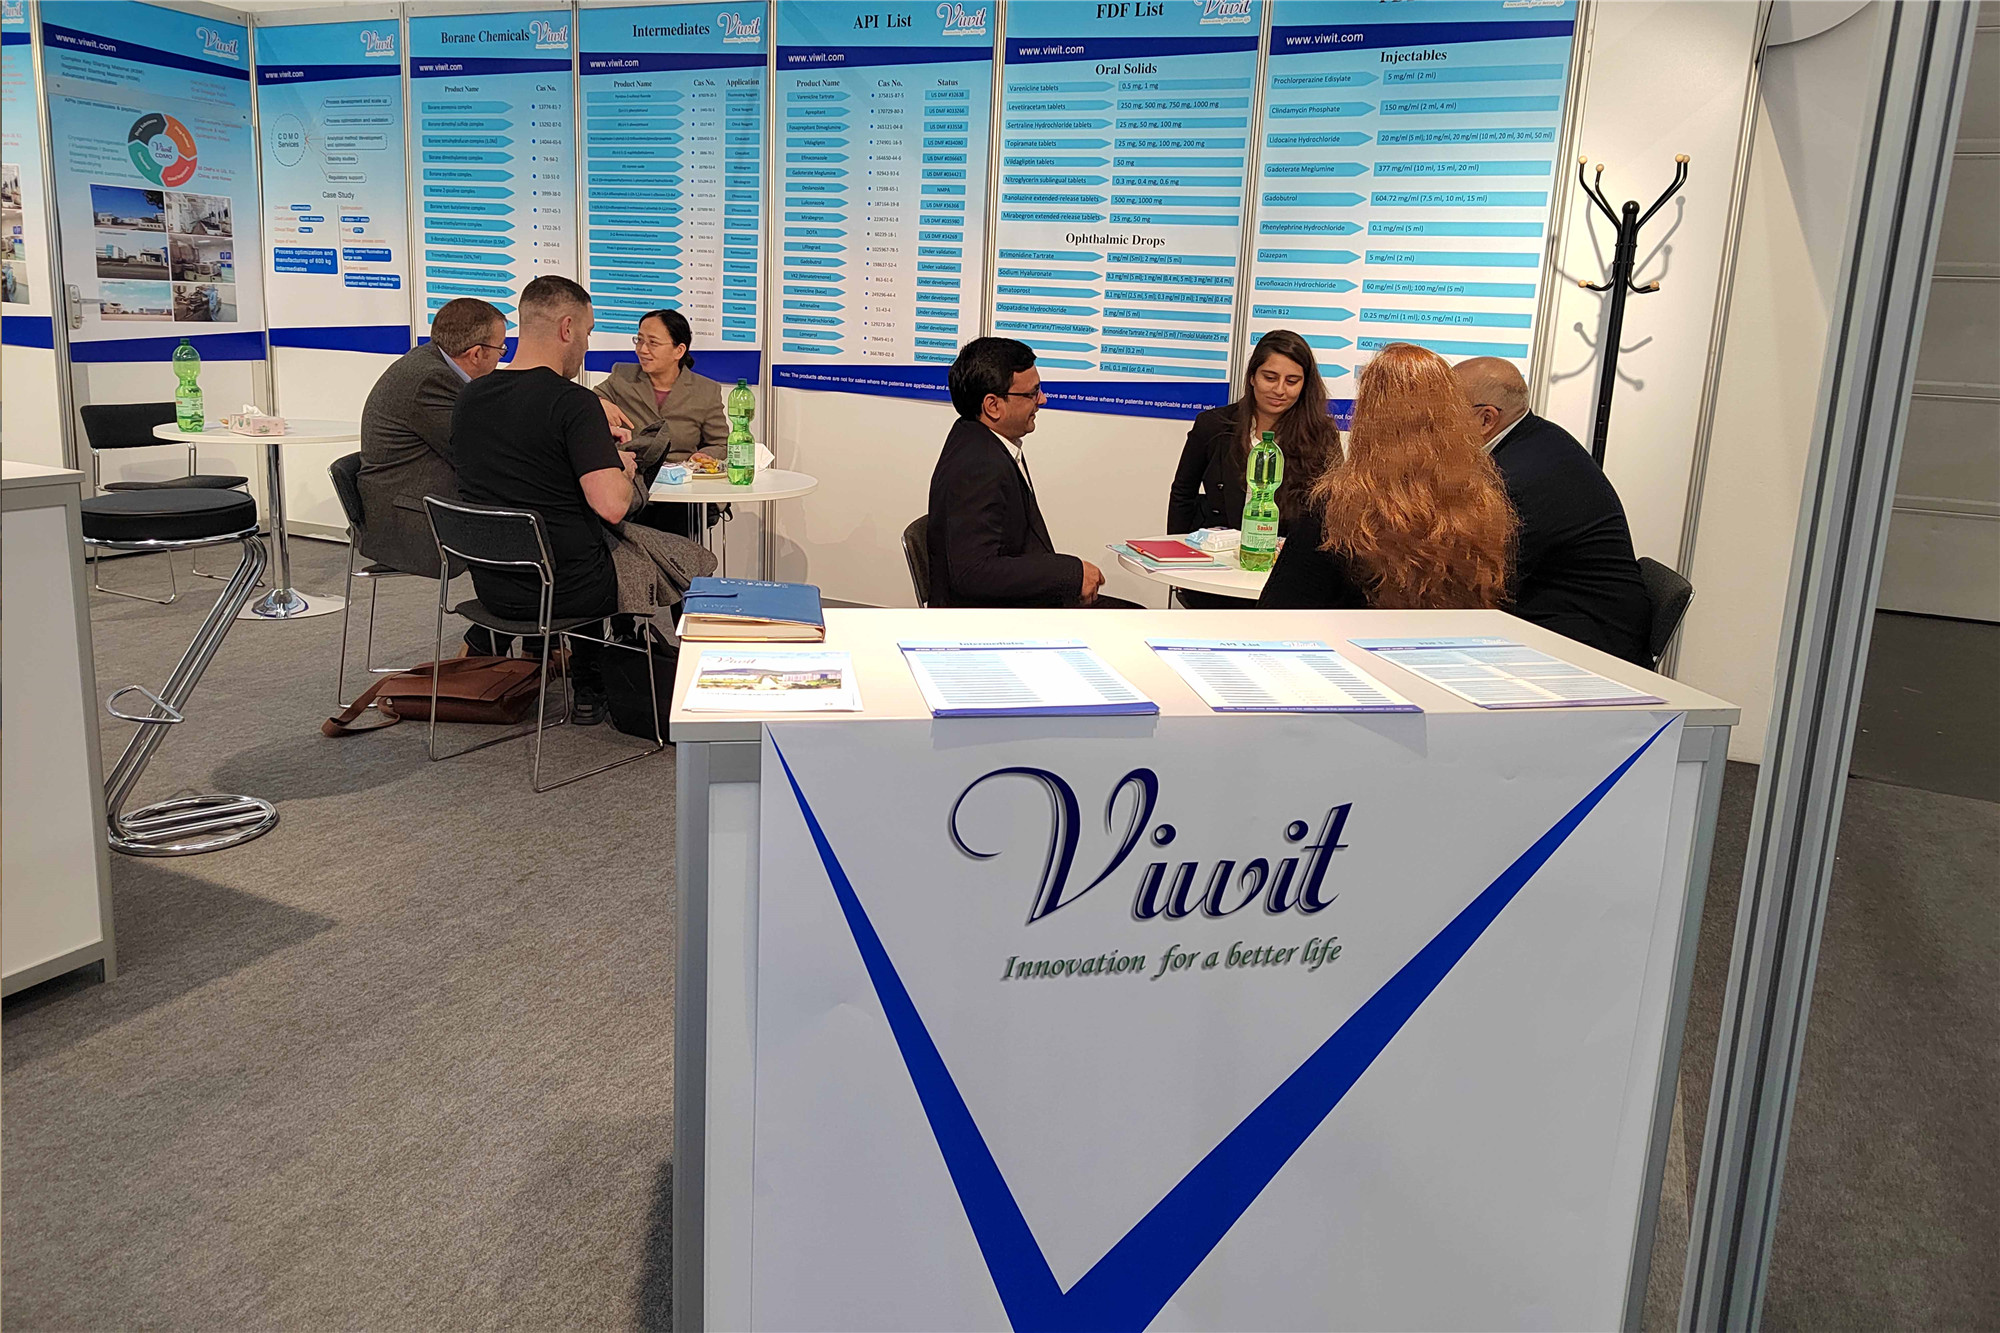 Viwit Pharmaceutical Co., Ltd. participated in CPHI Worldwide 2022 held in Frankfurt Germany from November 1st to November 3rd.